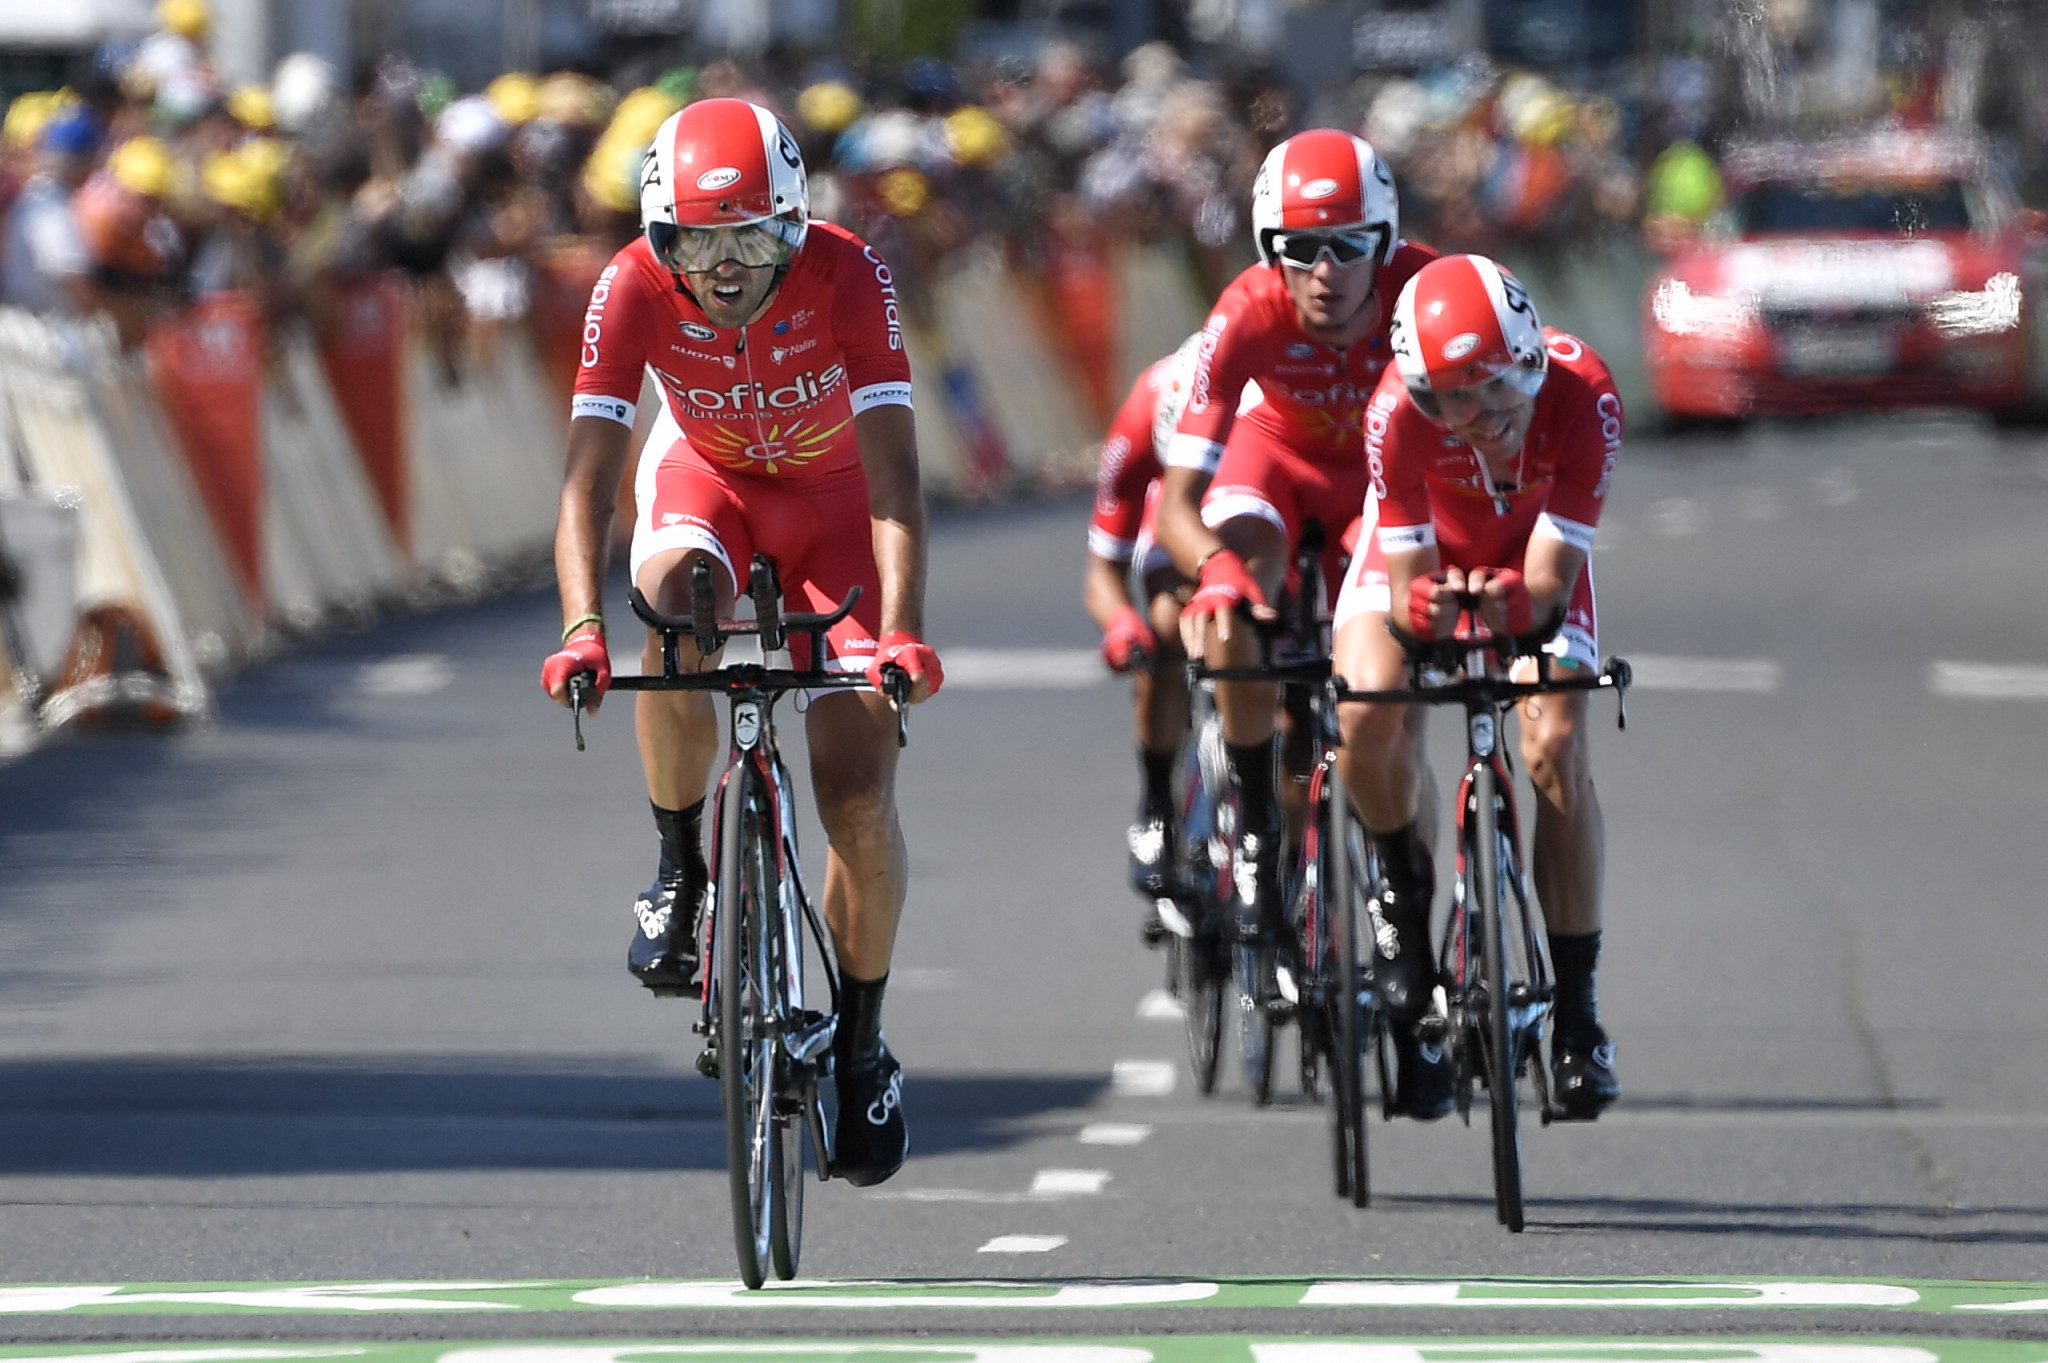 Cofidis Solutions Crédits have been awarded a wildcard to this year's Tour de France ©Getty Images